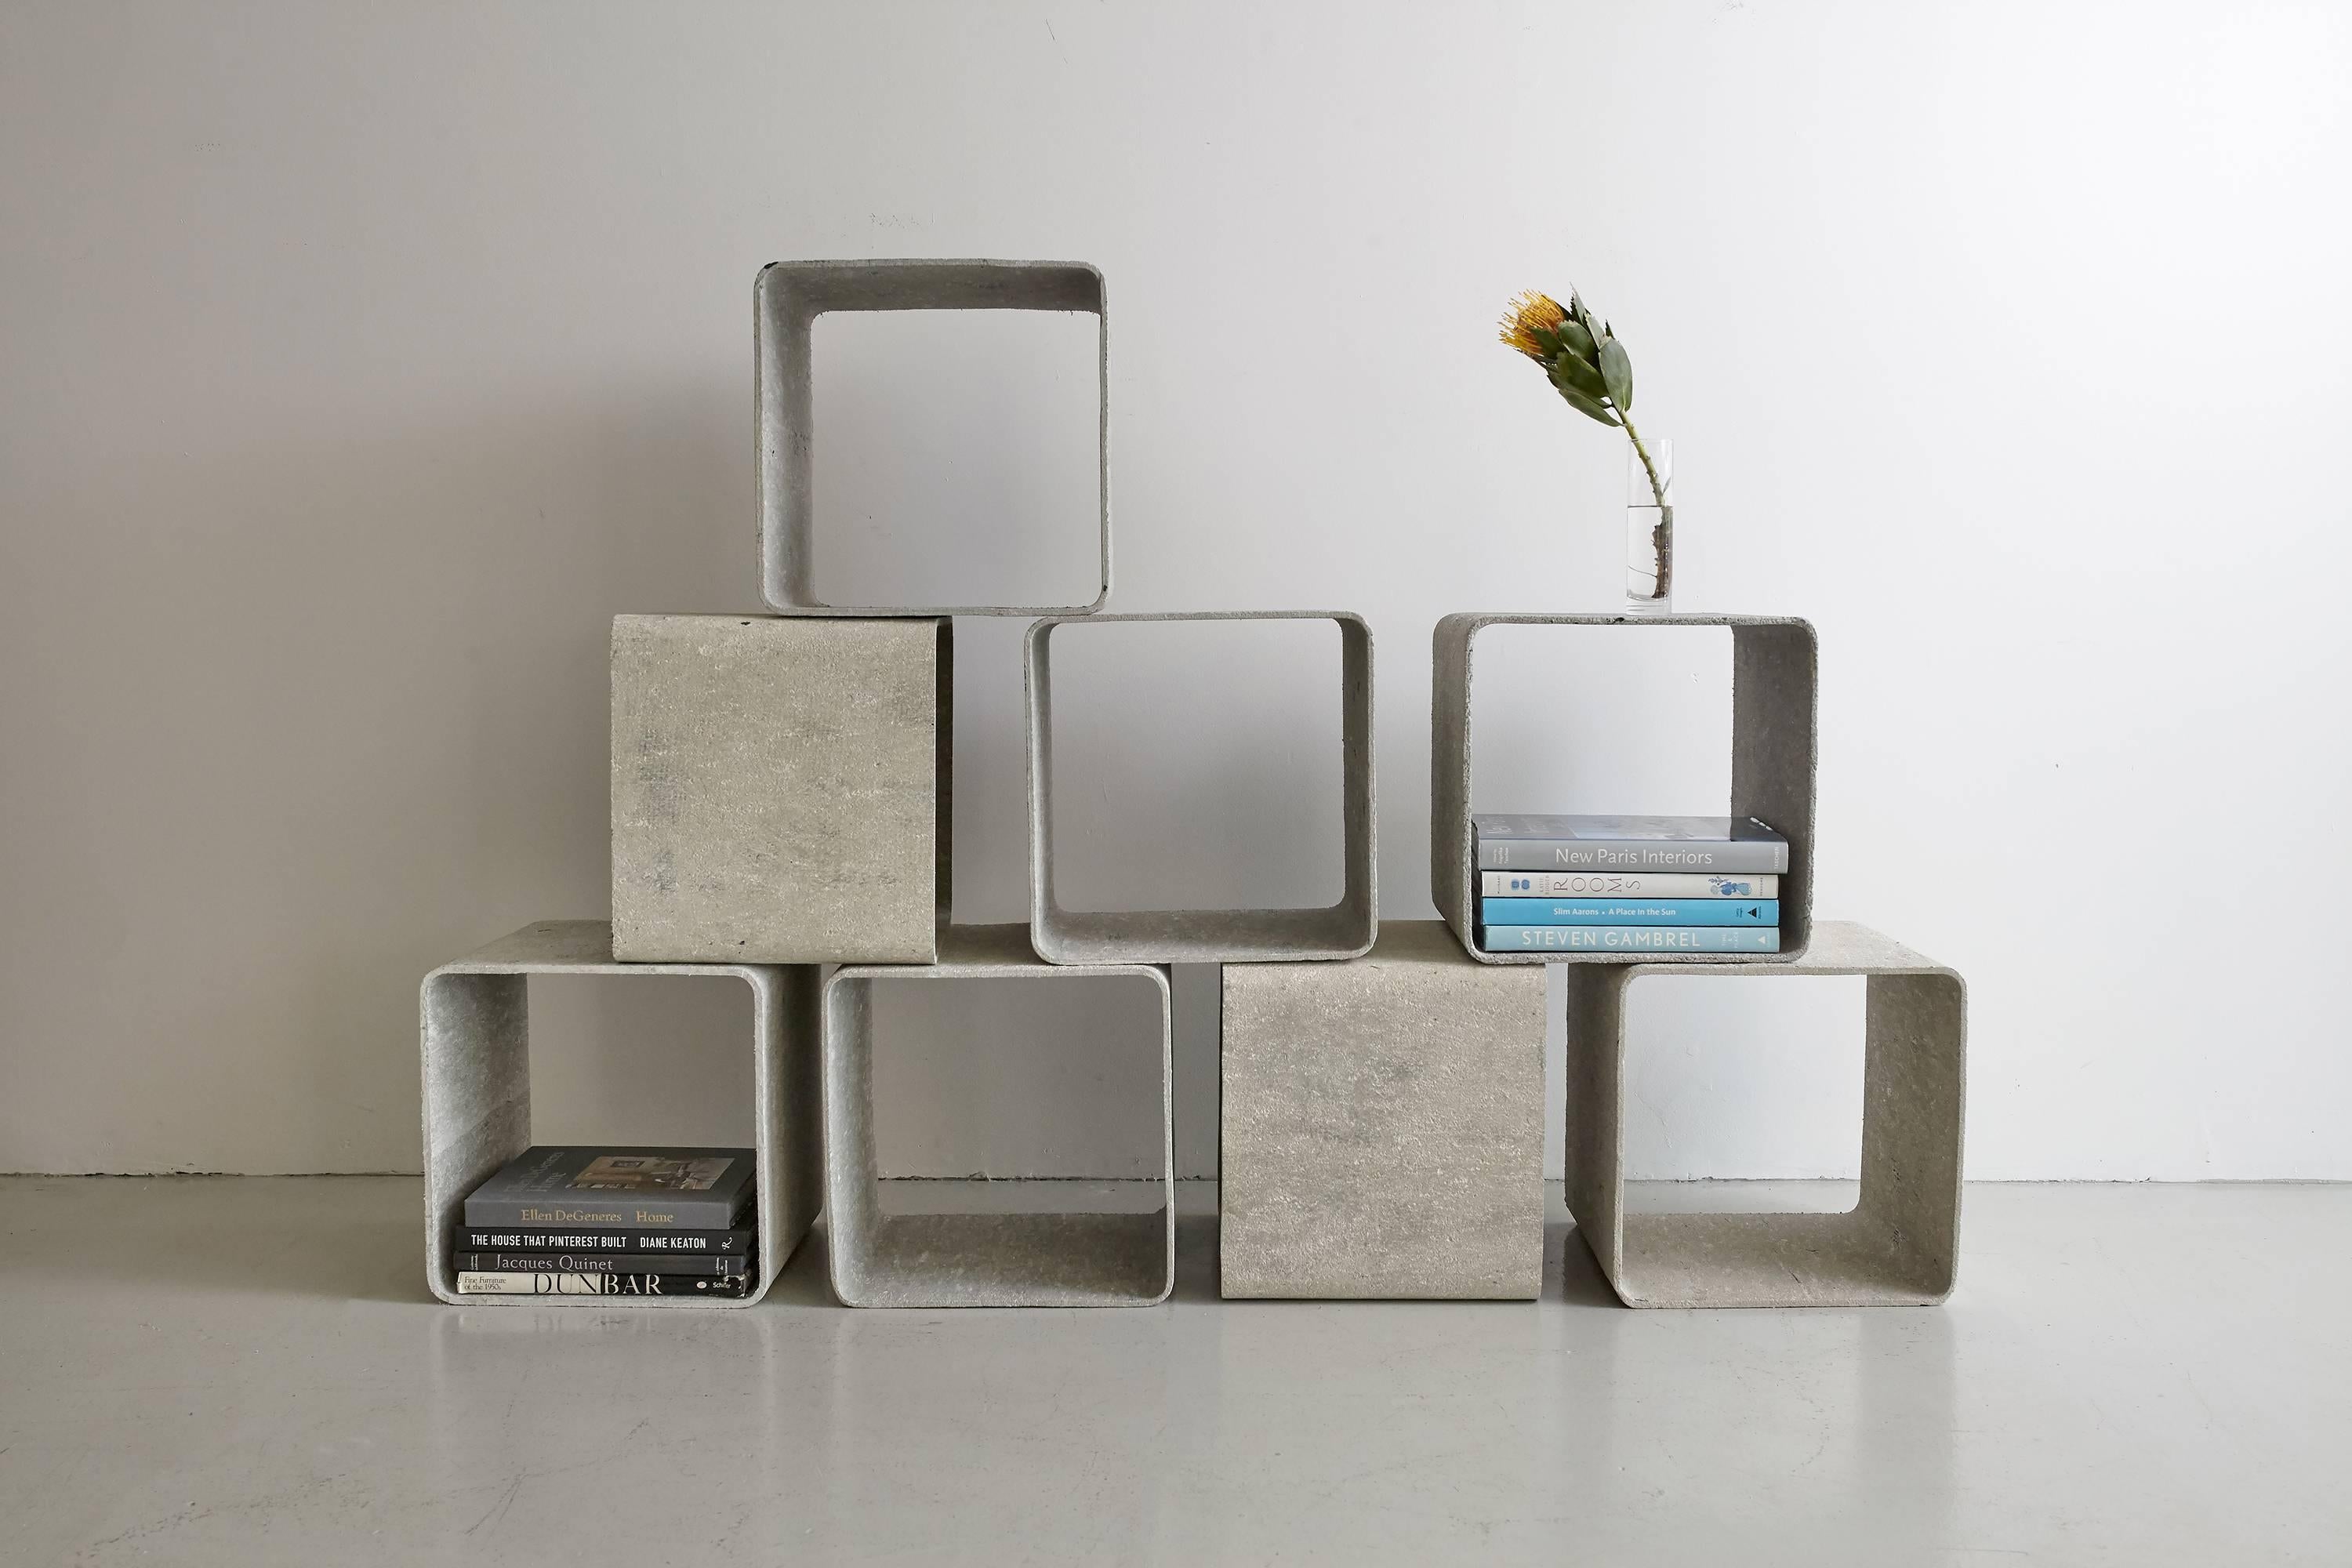 Incredibly rare cement and fiber modular shelving cubes by Willy Guhl. Each cement cube is freestanding and light weight enough to rearrange with ease. Would make an incredible room divider, media storage, or display shelves! Great patina. Suitable